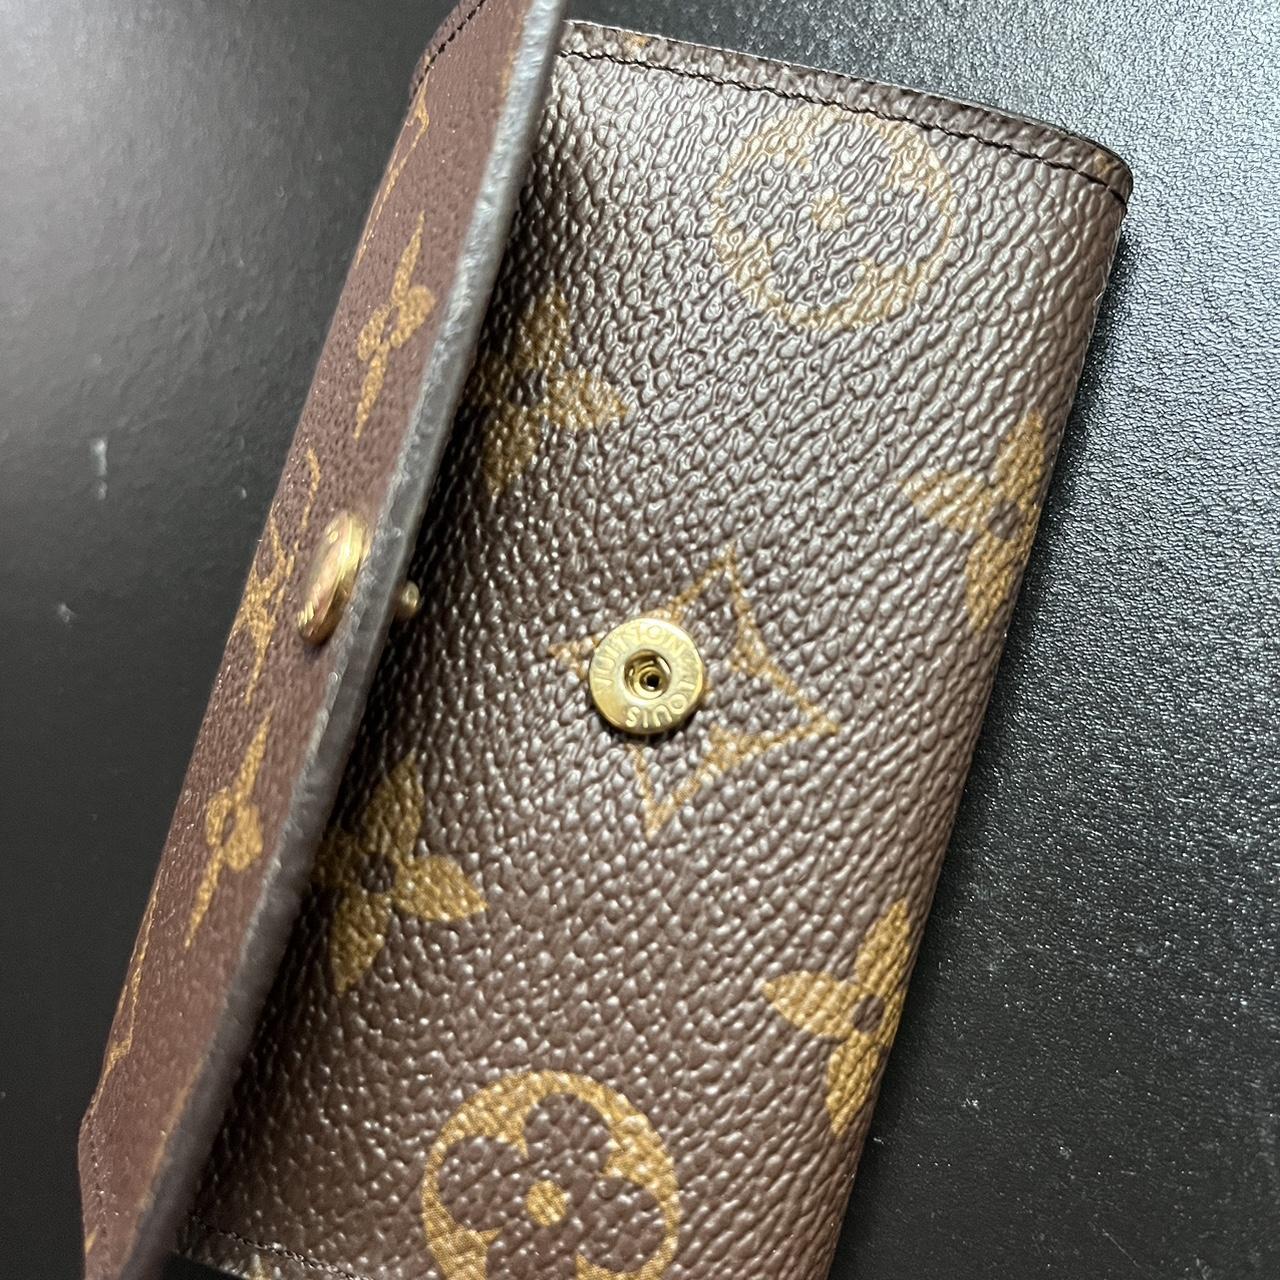 Louis Vuitton Key Holder in brown leather with LV - Depop